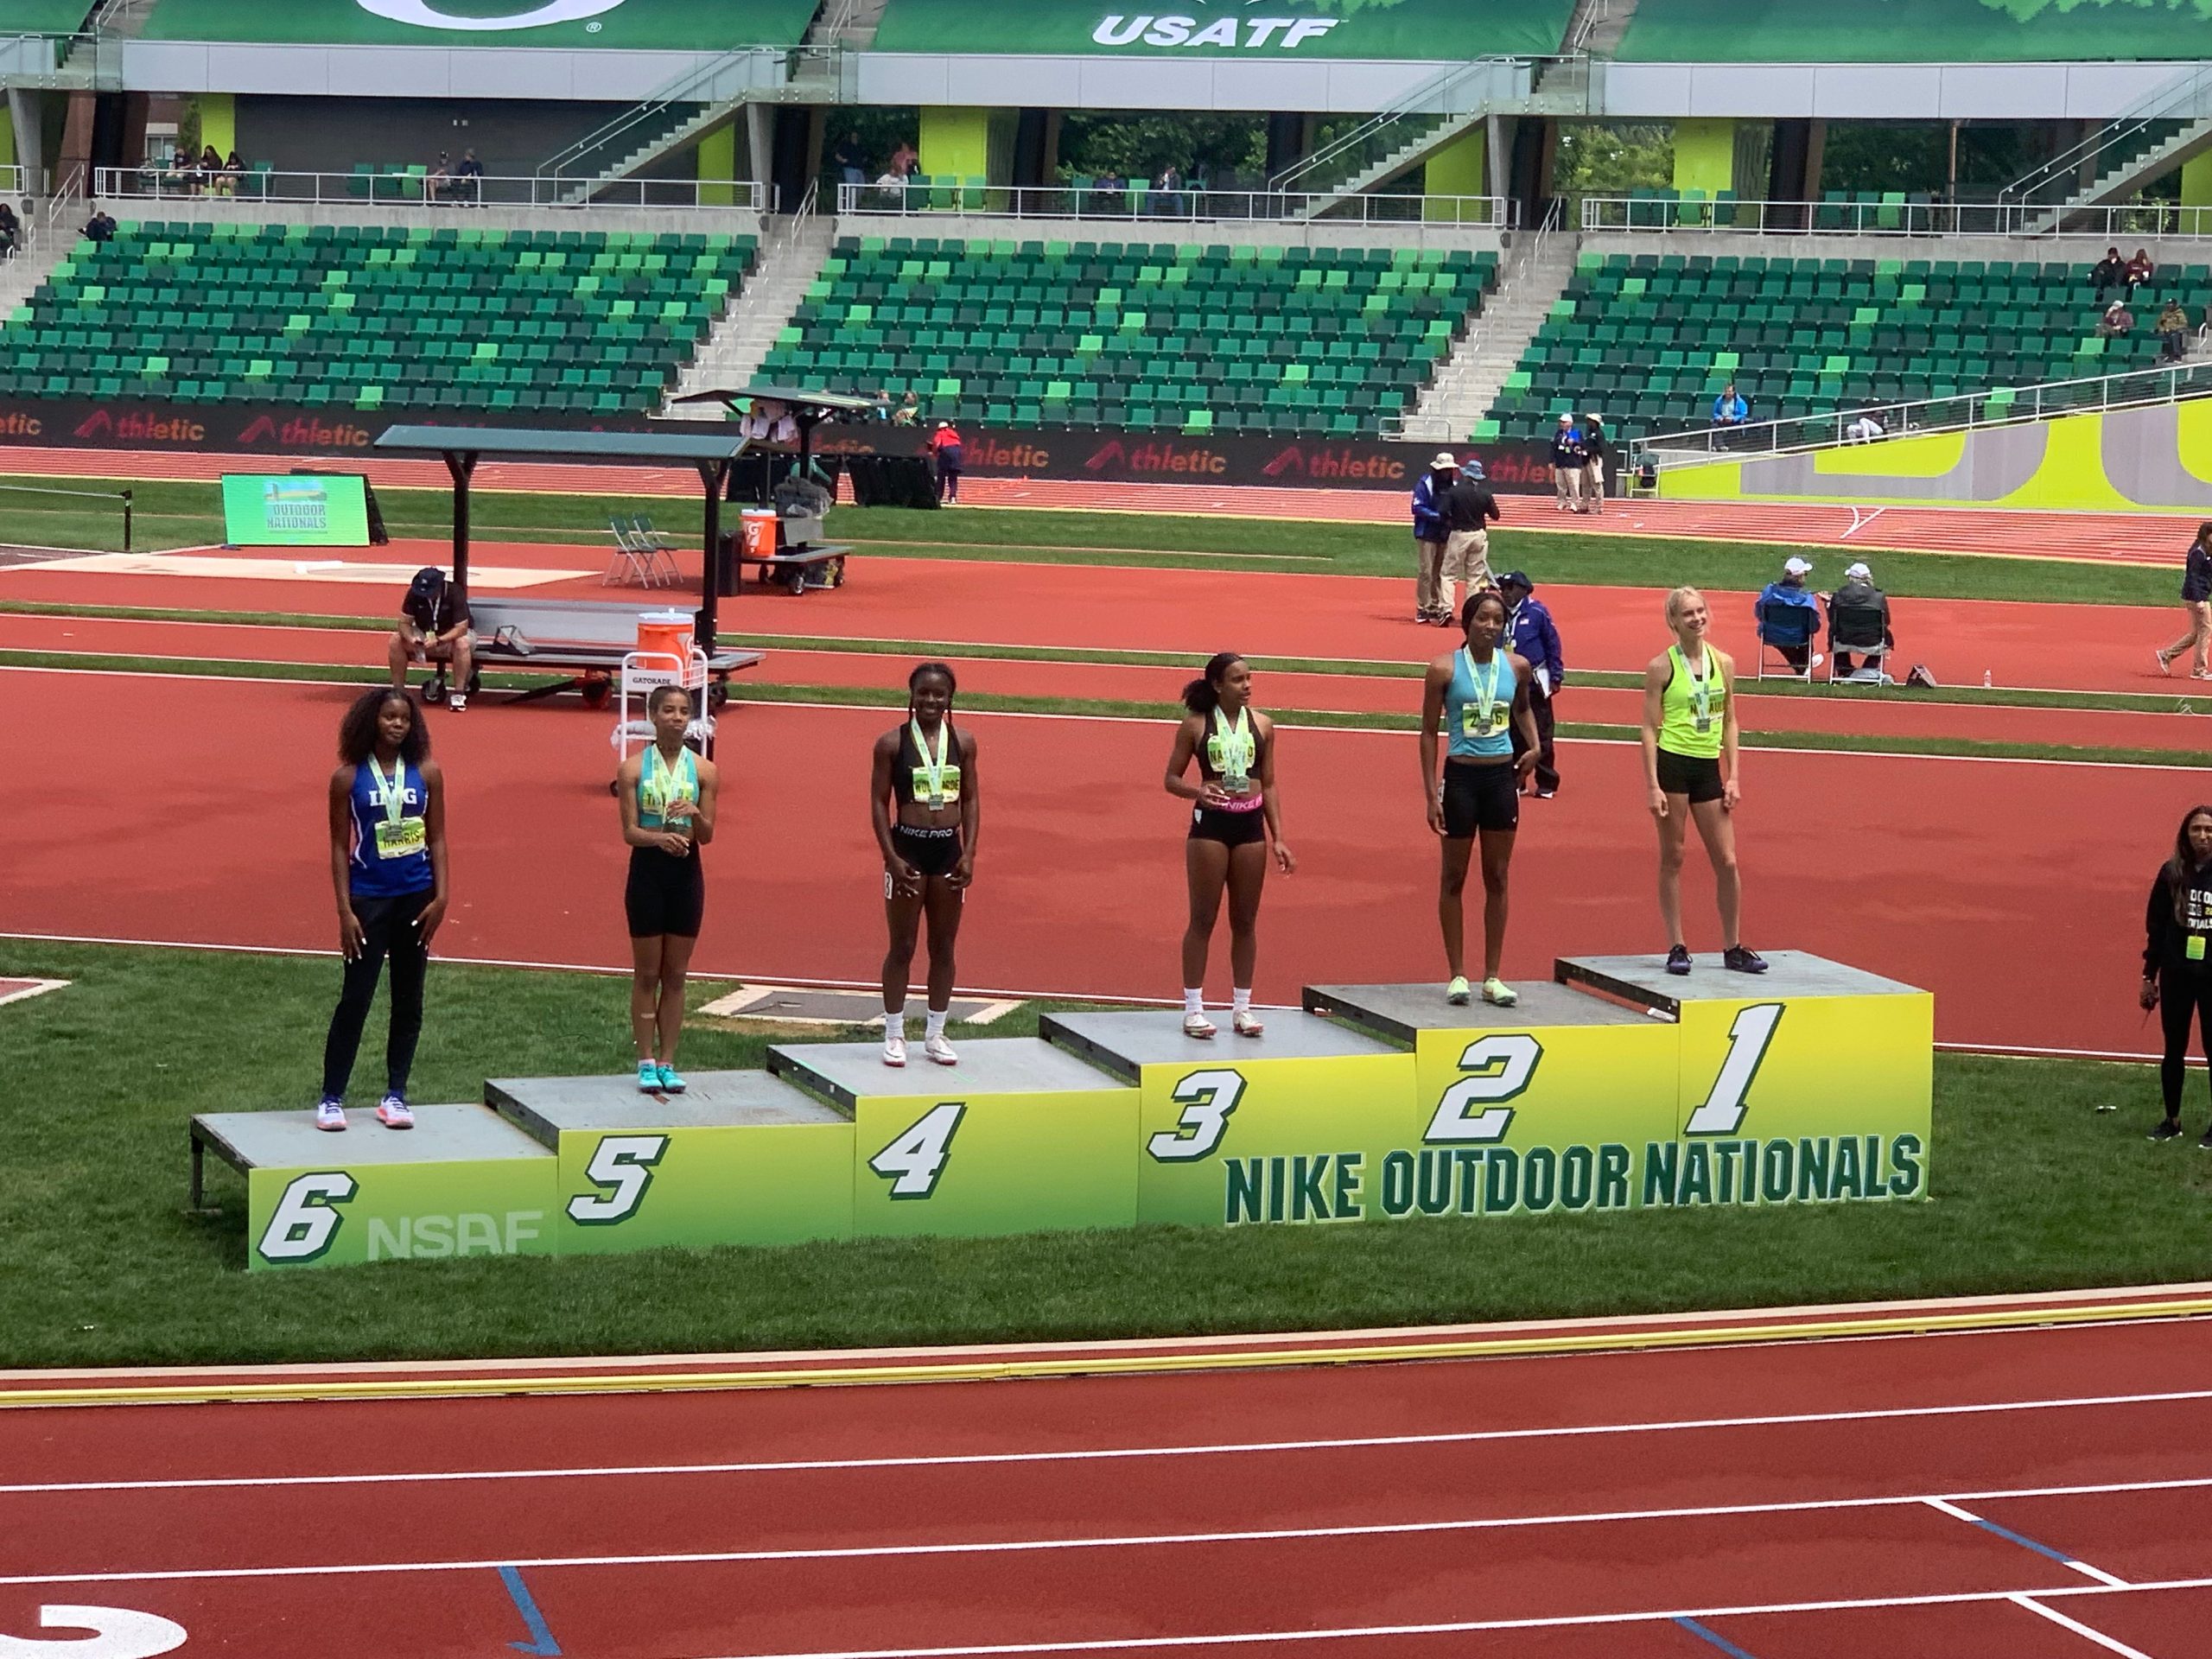 Nadauld wins takes 2nd in 100M at Nike Outdoor Nationals – George News